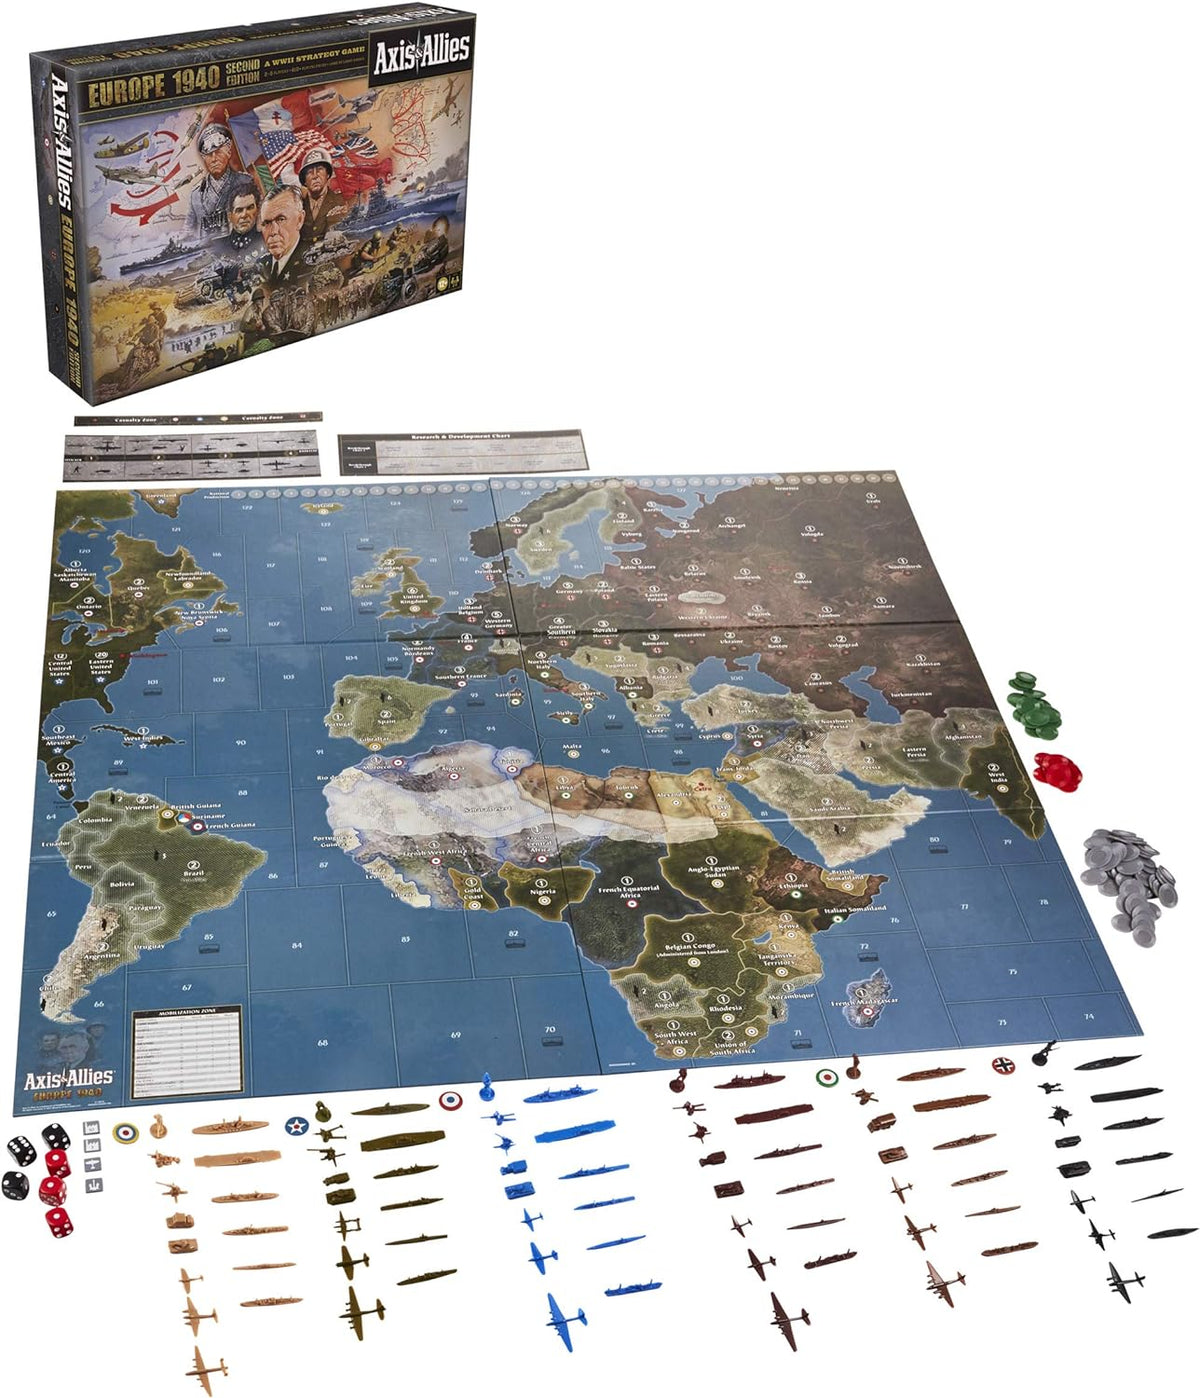 Axis & Allies: 1940 Europe Second Edition